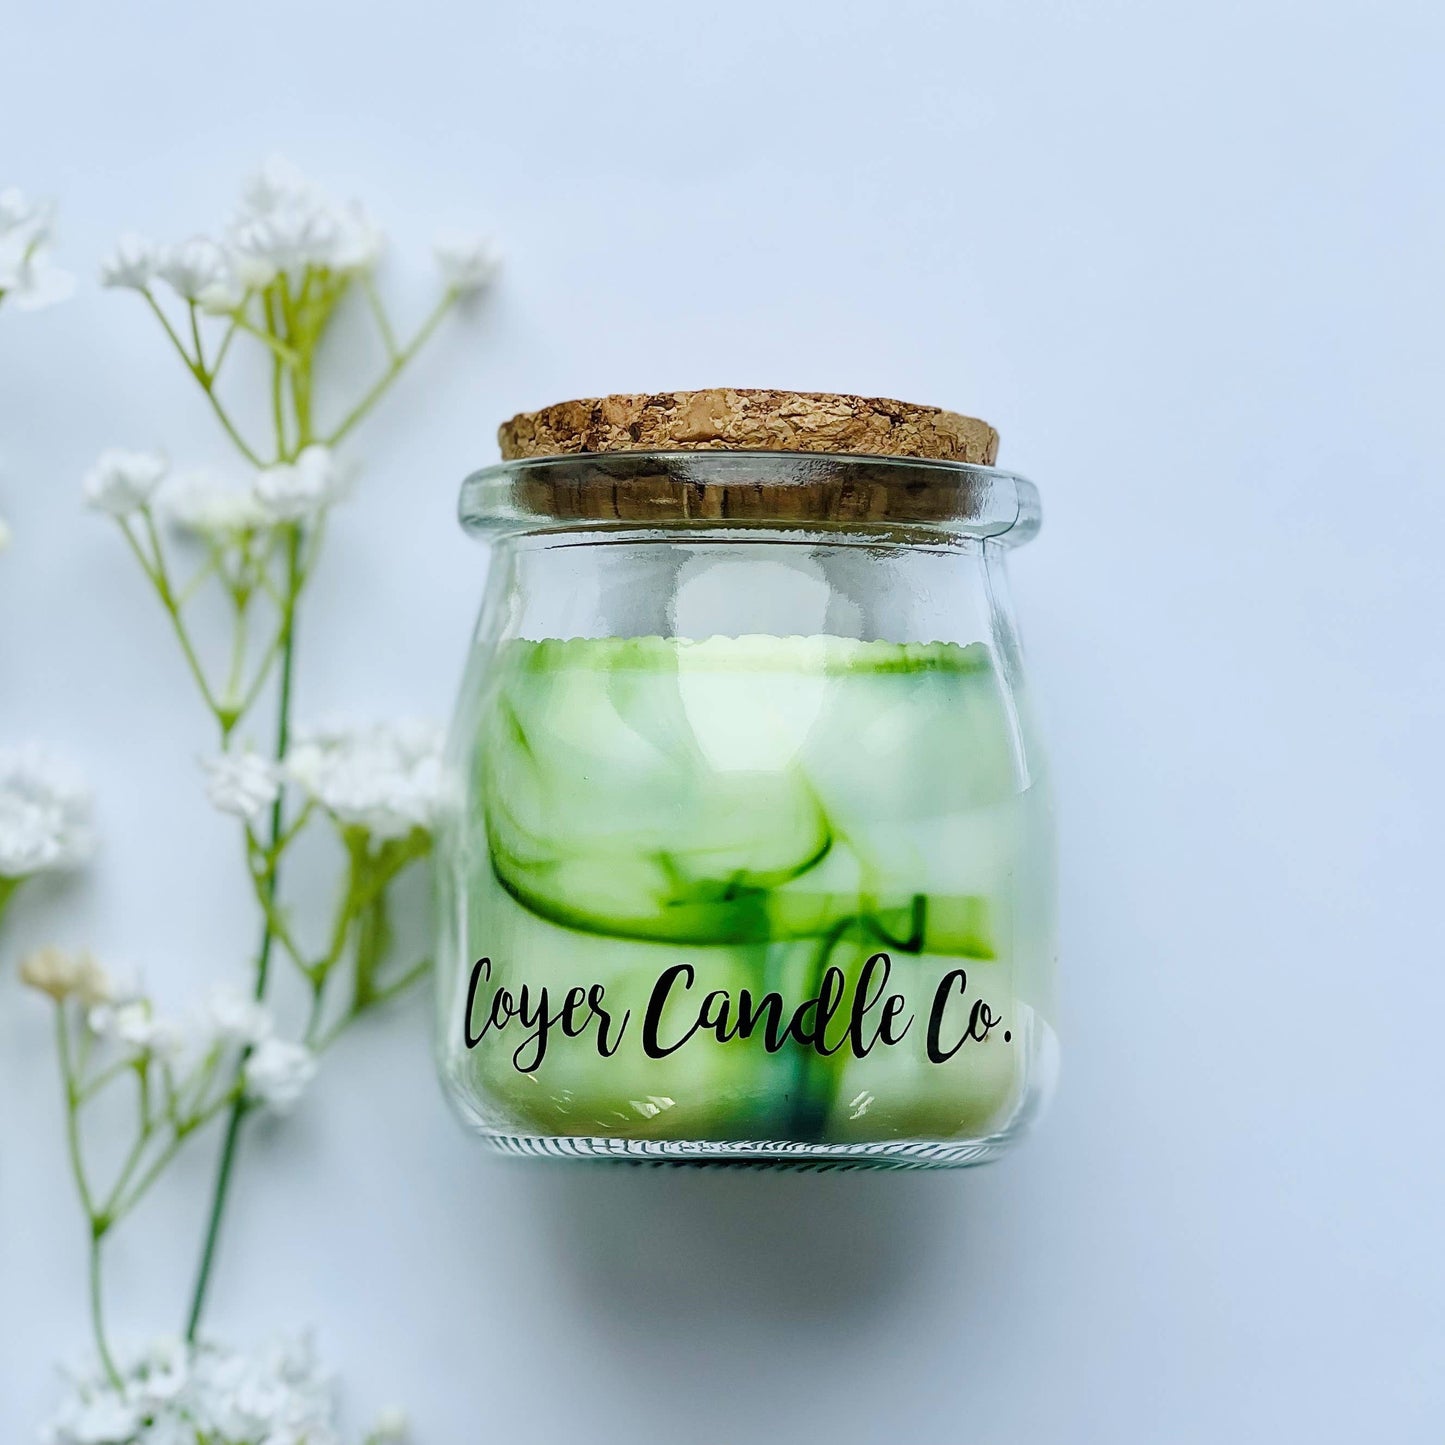 Coyer Candle Co. - 5 oz. Studio Jar Candles - Spring Collection: Home is Where the Heart Is / Dye Free